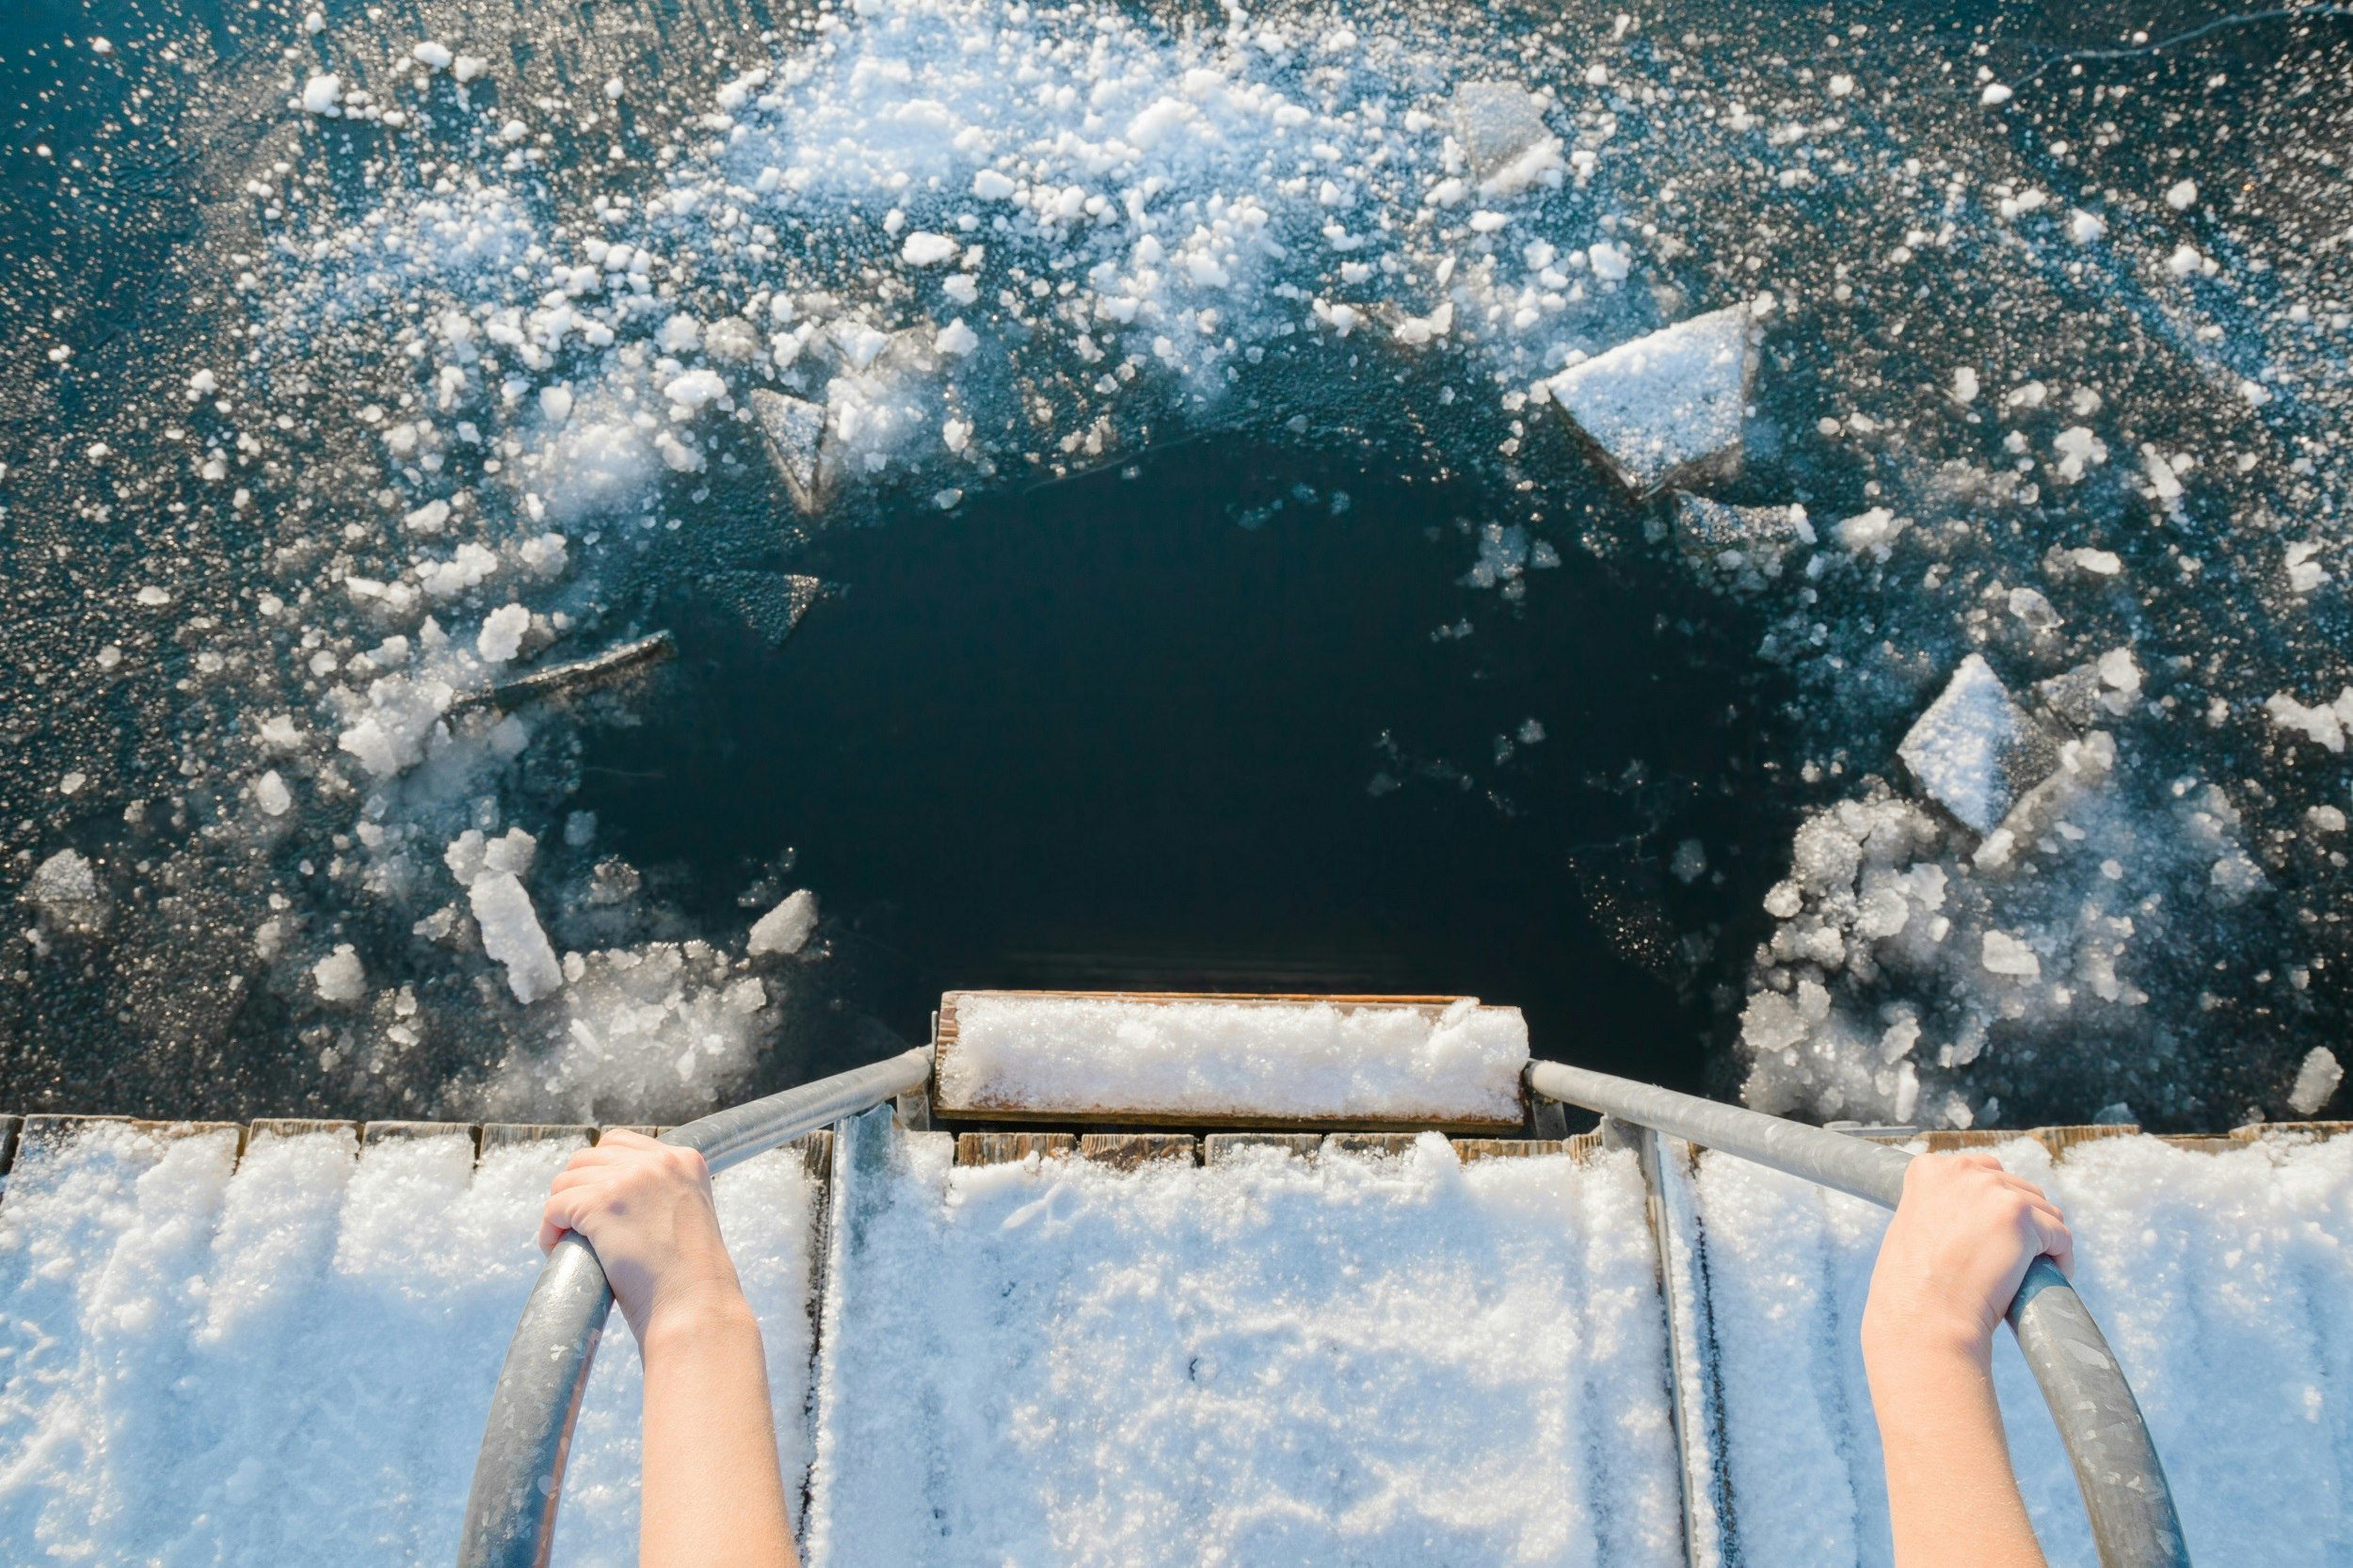 A point-of-view shot downwards into the frozen water. Hands hold on to railings and the shot focuses on the hole in the ice.